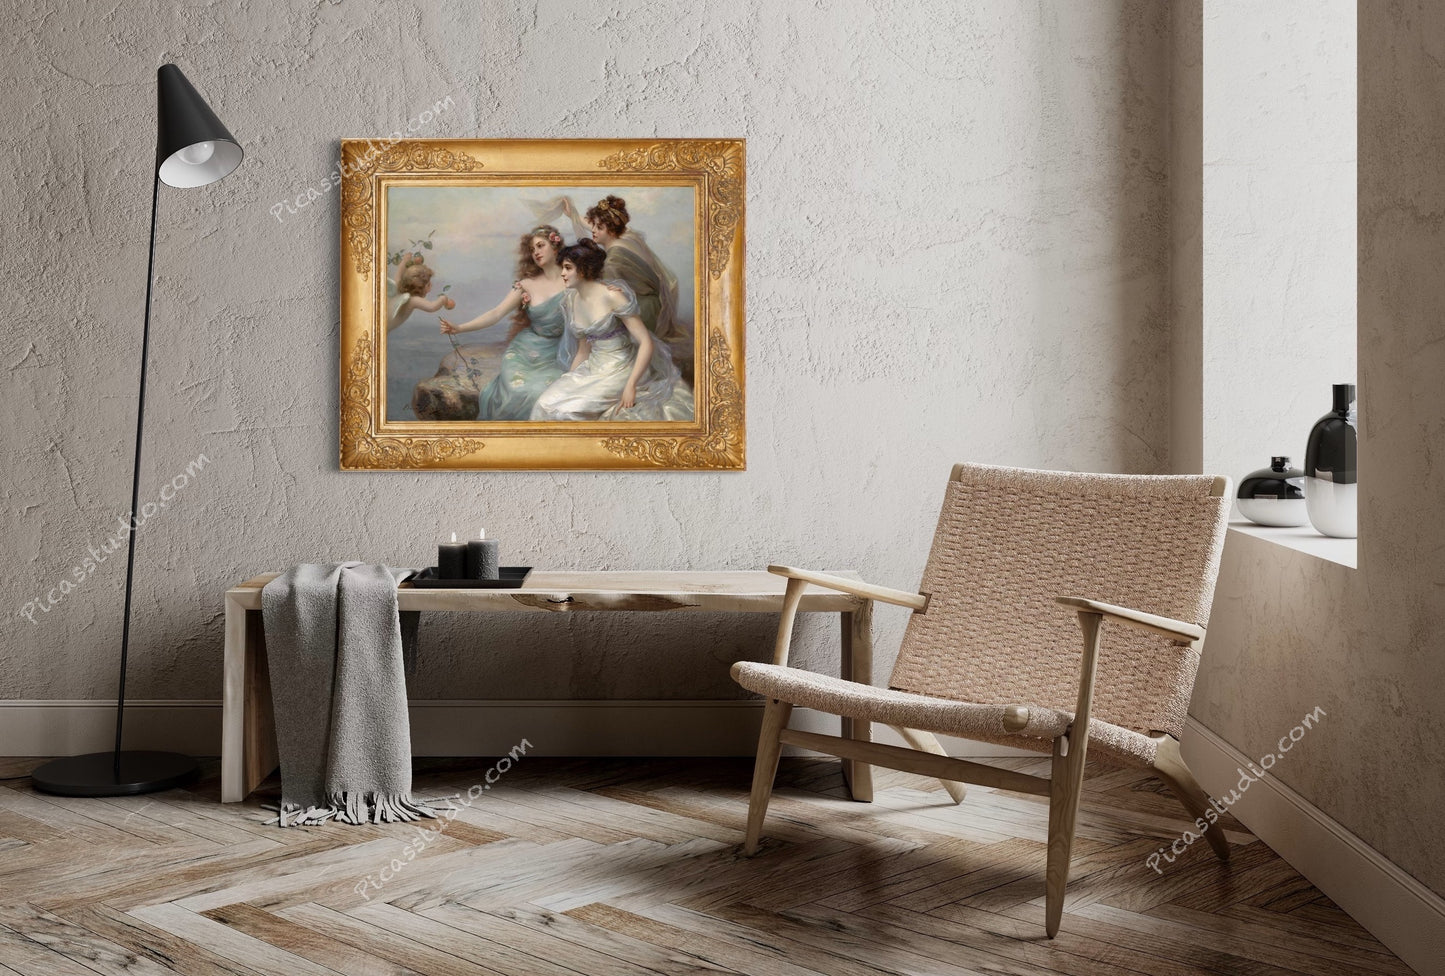 The Three Graces by Edouard Bisson Oil Painting Hand Painted on Canvas Vintage Wall Art Decor Unframed